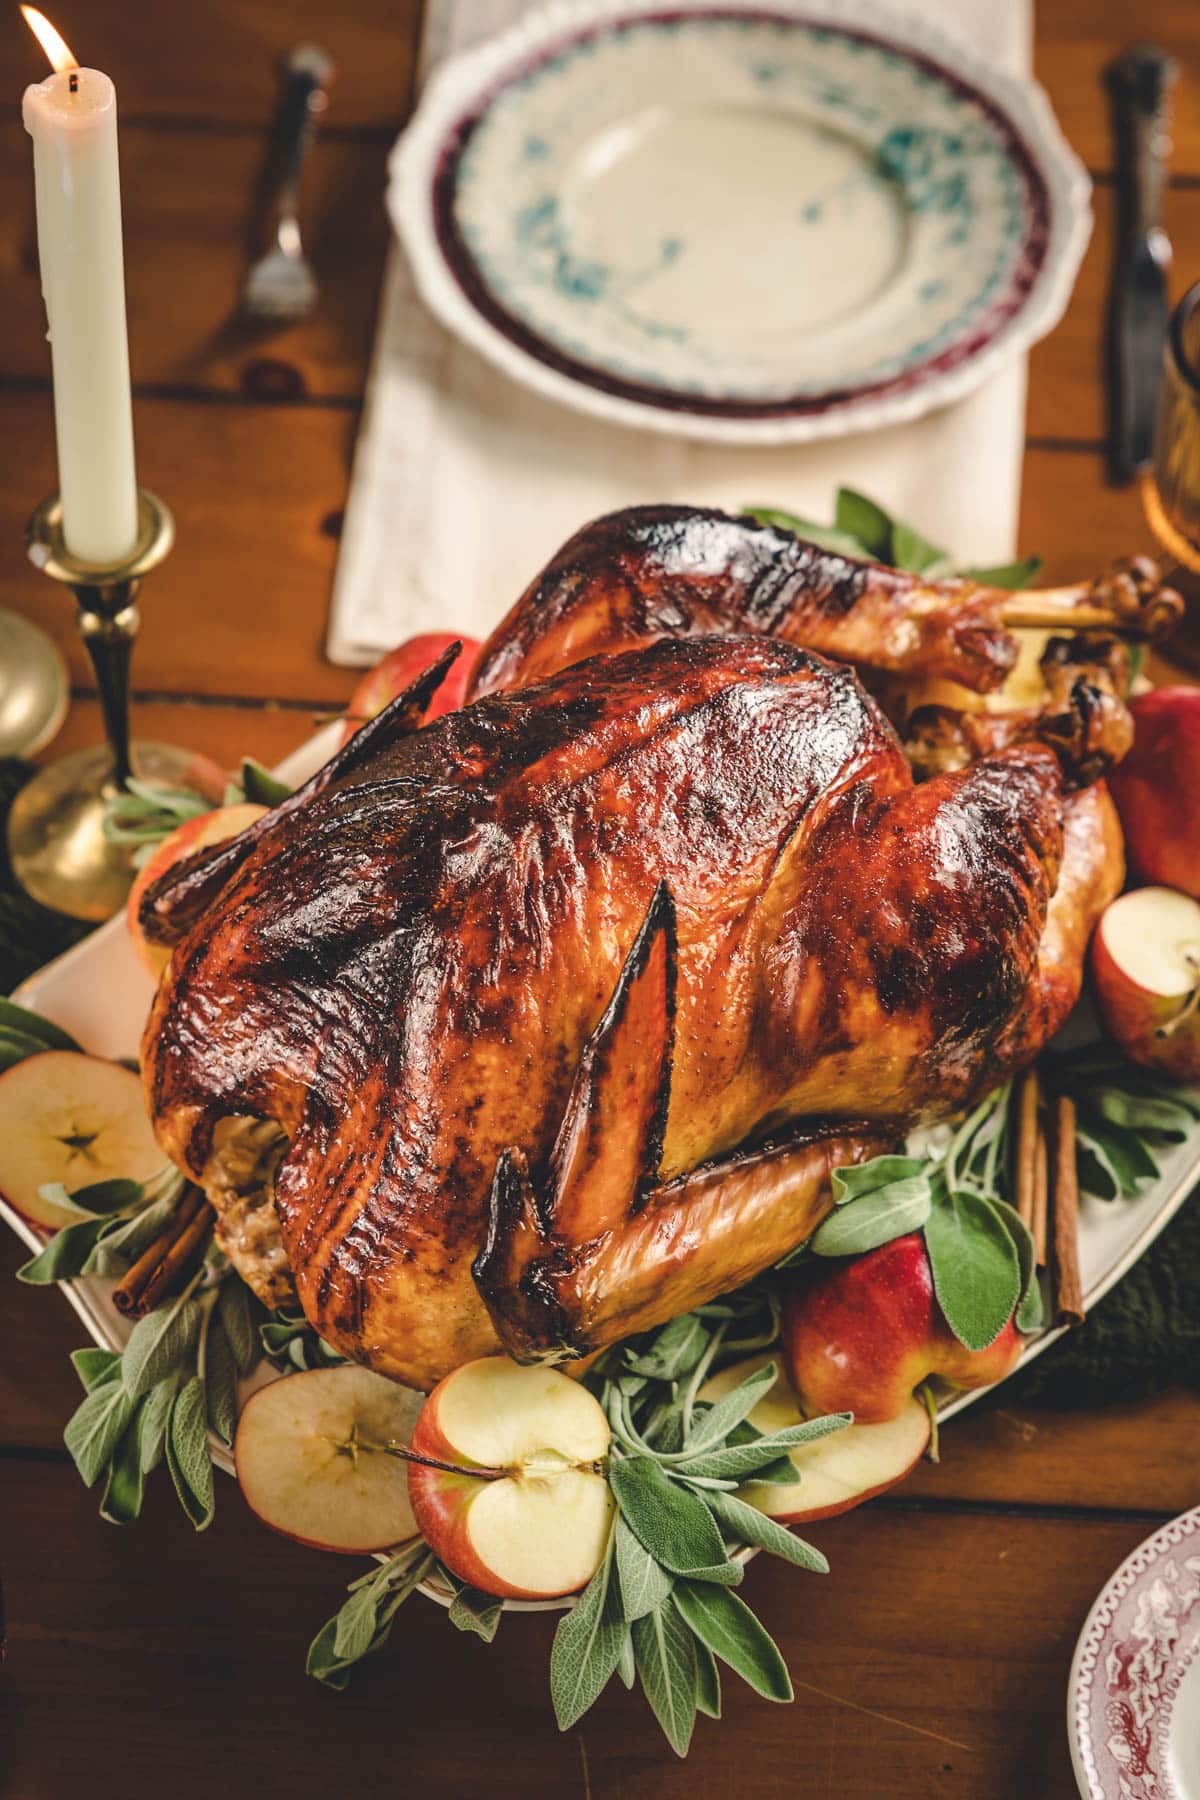 Whole roasted turkey, placed on a platter overtop sage leaves and surrounded by red apples.